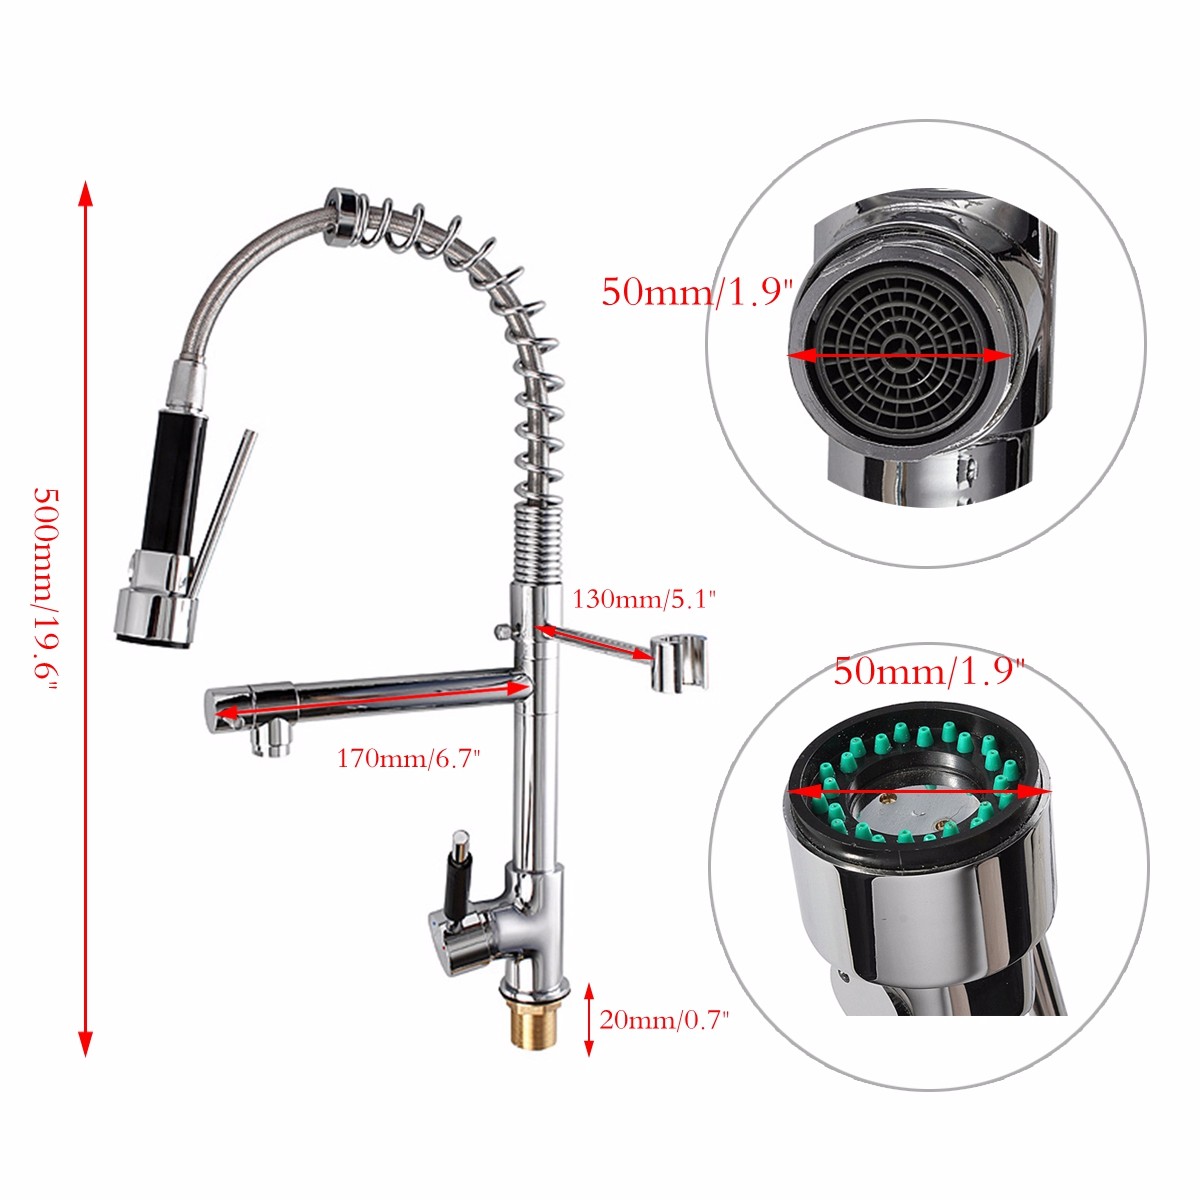 Kadell G1/2'' Silver Kitchen Faucet Single Handle Pull Down Sprayer Sink Mixer Tap Kitchen Sink Faucet Pull out Spray Rotating Tap - image 2 of 8